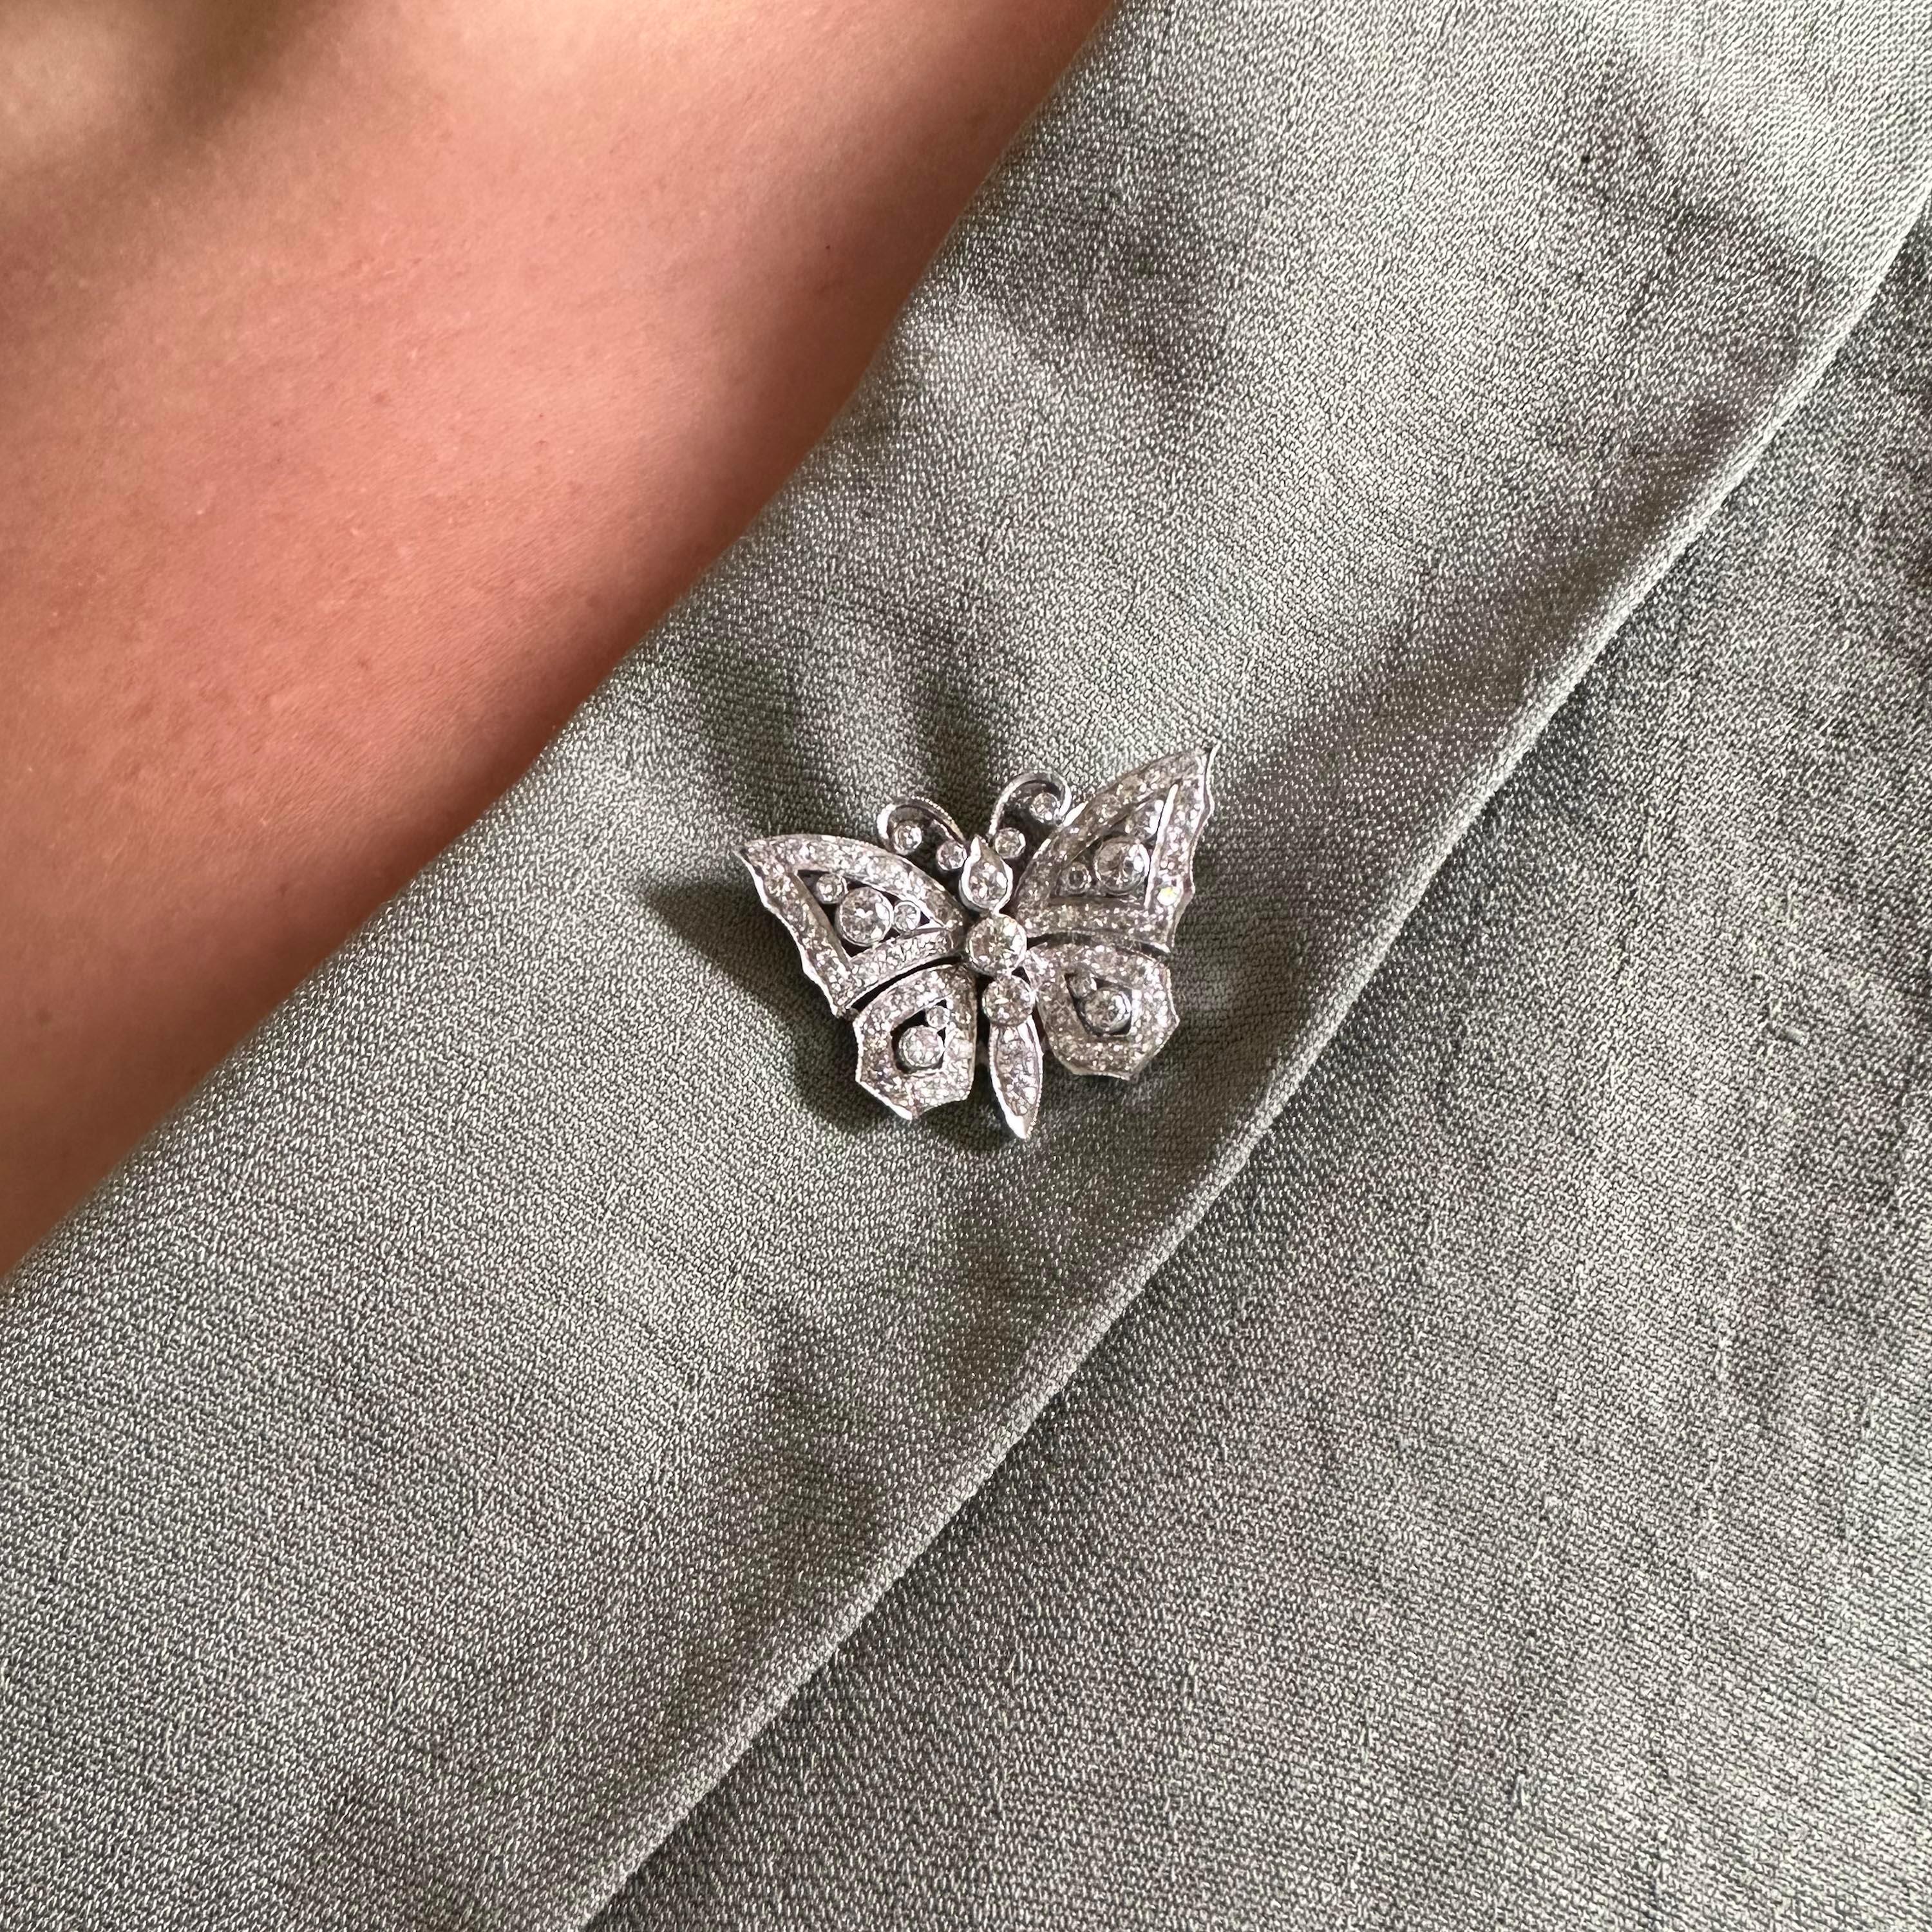 A diamond butterfly brooch, set with round brilliant-cut diamonds in rub over and grain settings, mounted in platinum, with a pin and roller catch fitting, circa 1990, with and approximate total diamond weight of 1.40 carats.